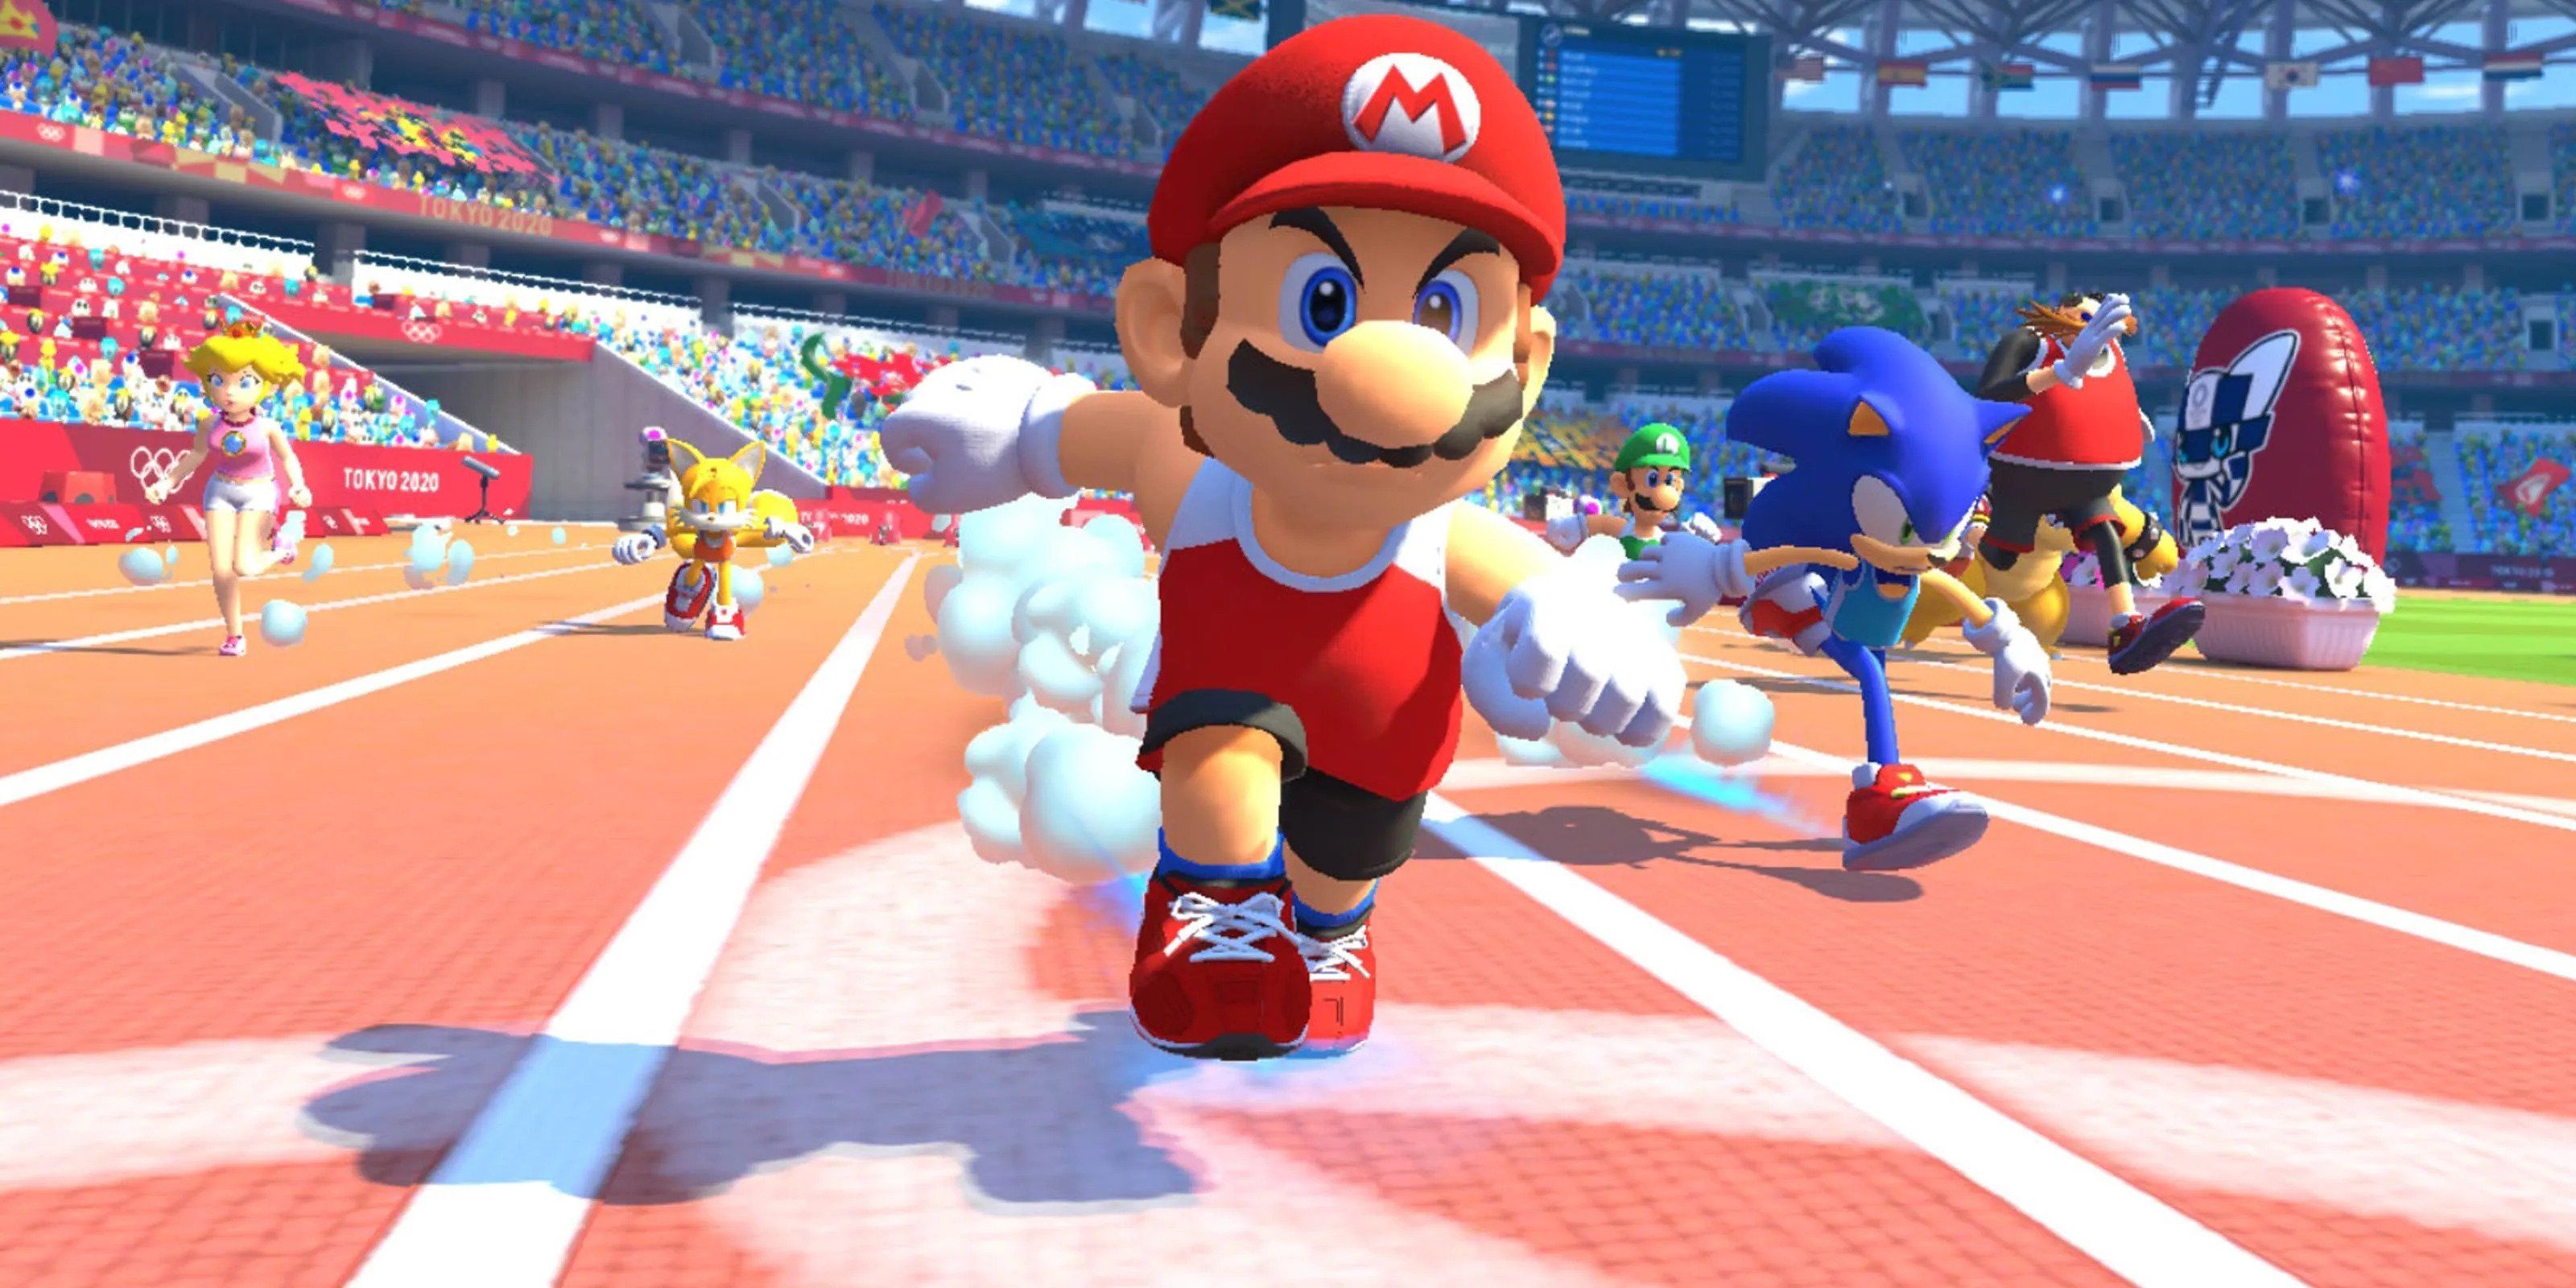 Mario and Sonic running along an Olympic track